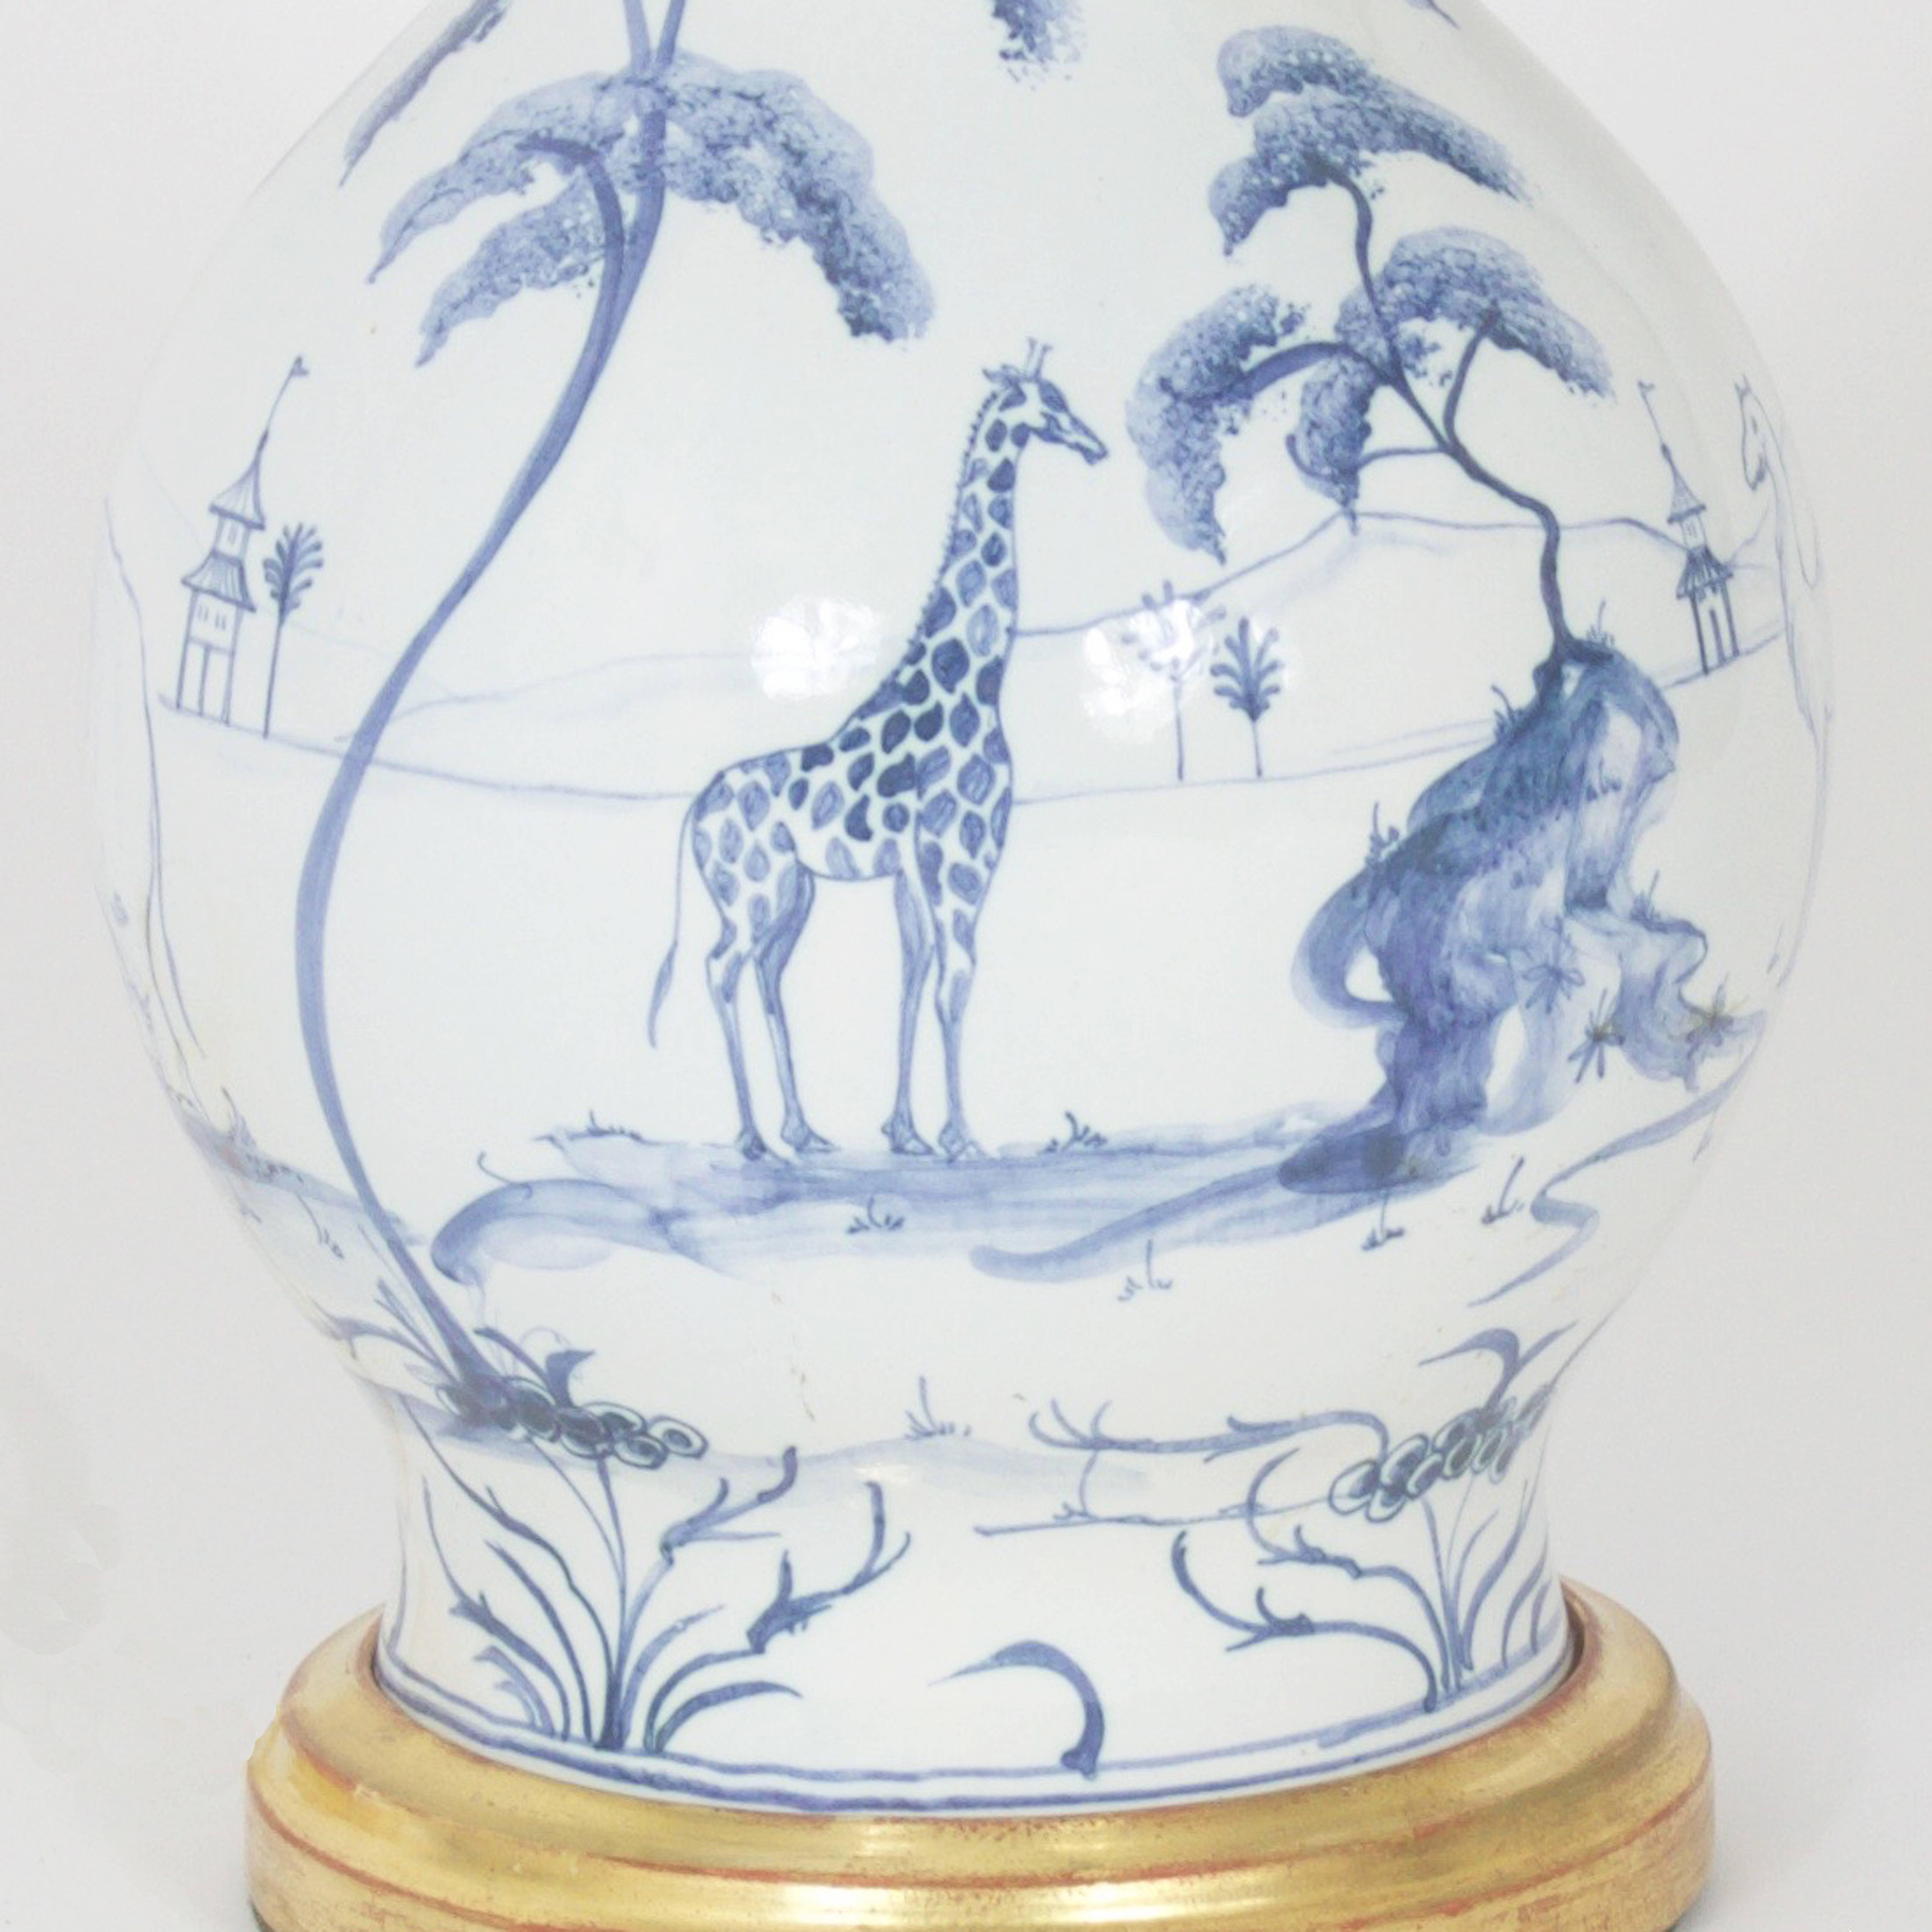 20th Century Pair of Blue and White Tropical or Safari Motif Porcelain Table Lamps 